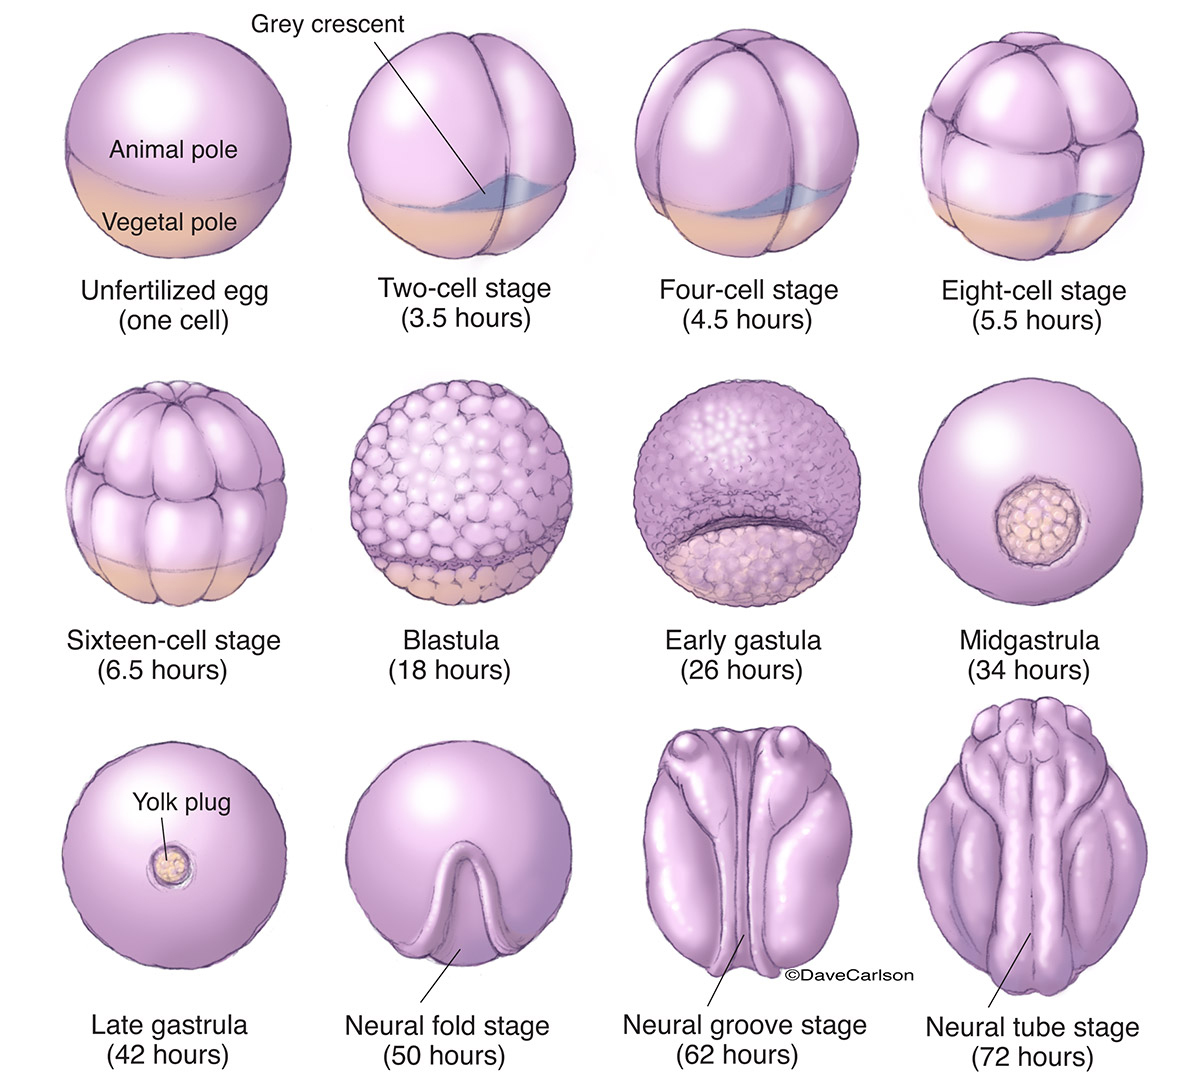 Illustration of typical amphibian embryonic development from single cell (unfertilized egg) to neural tube stage (72 hrs).